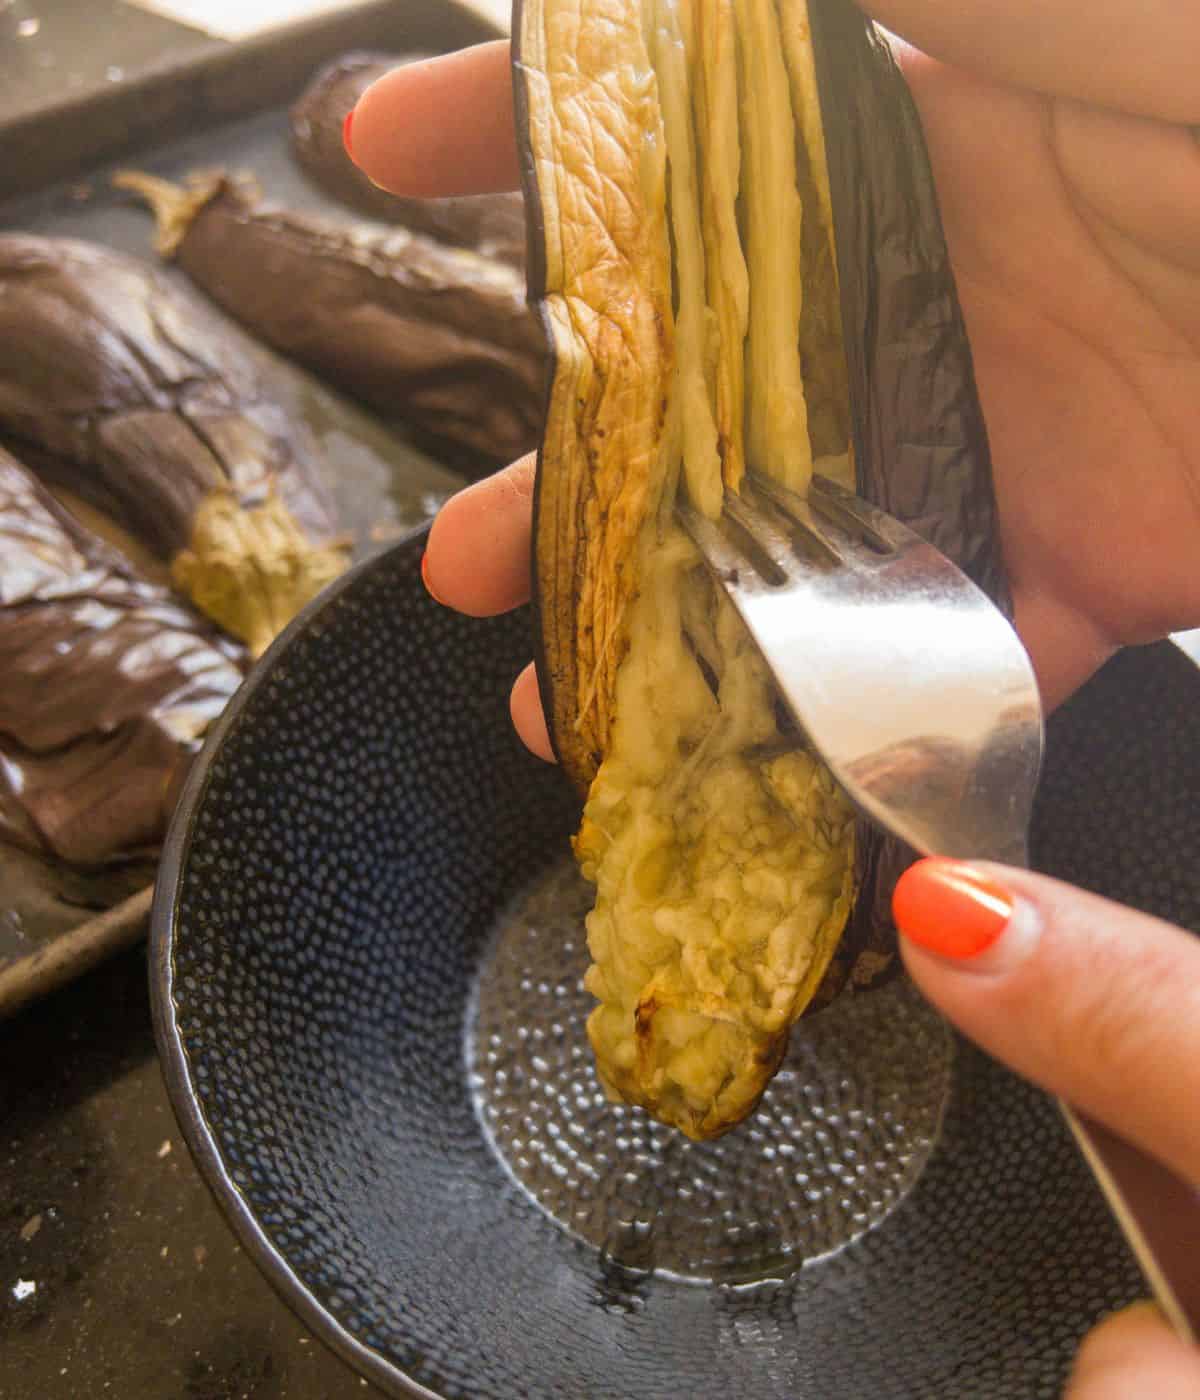 The inside of a roasted aubergine being scraped out with a fork into a bowl